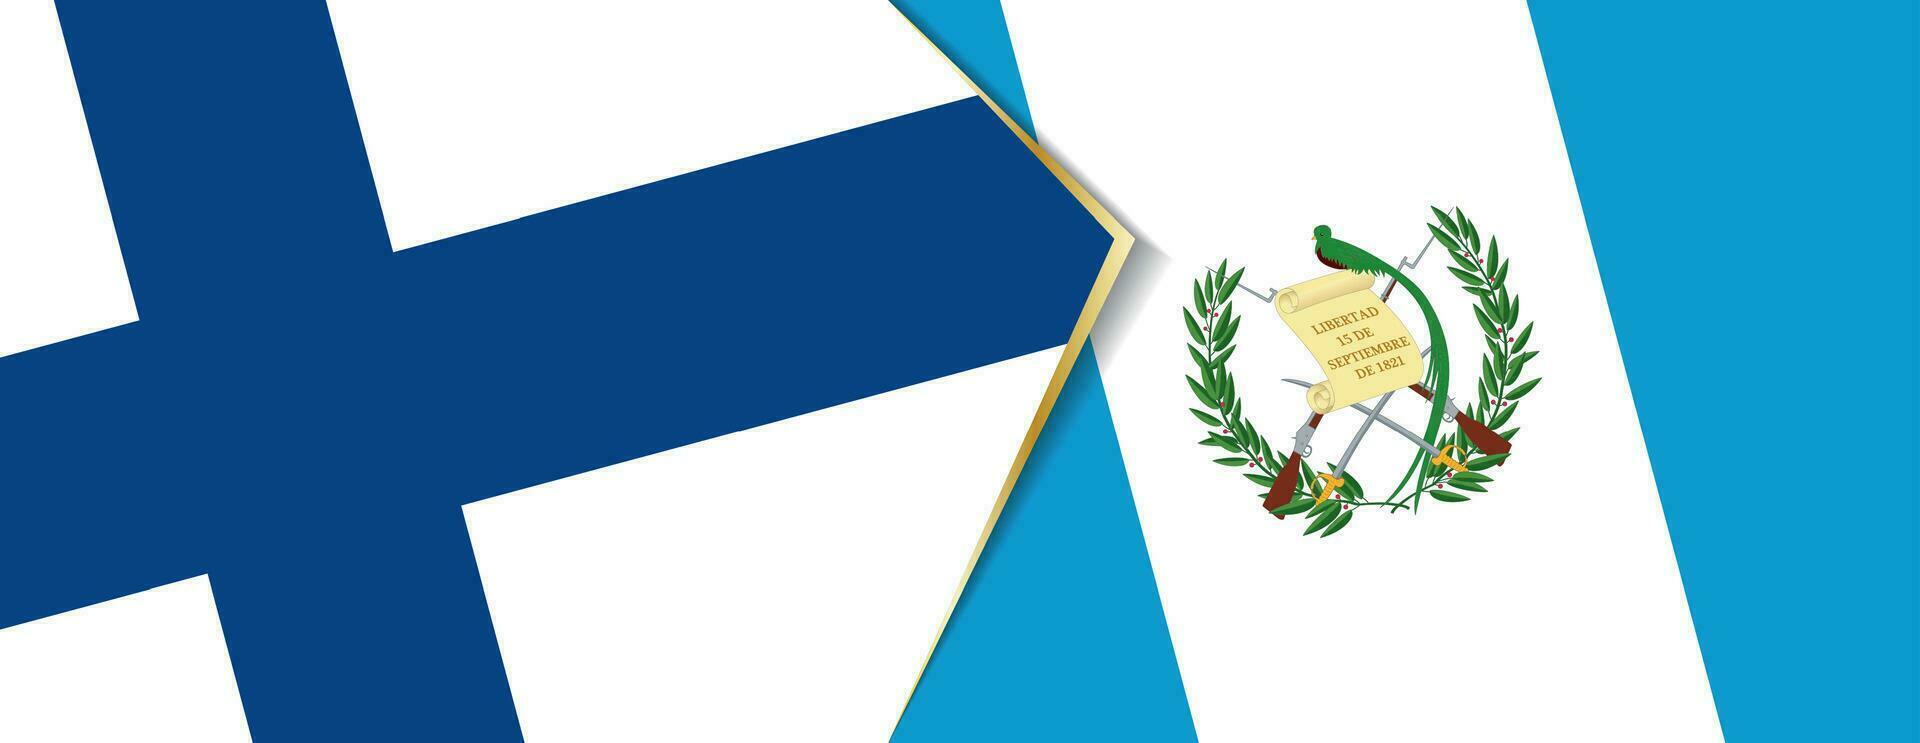 Finland and Guatemala flags, two vector flags.